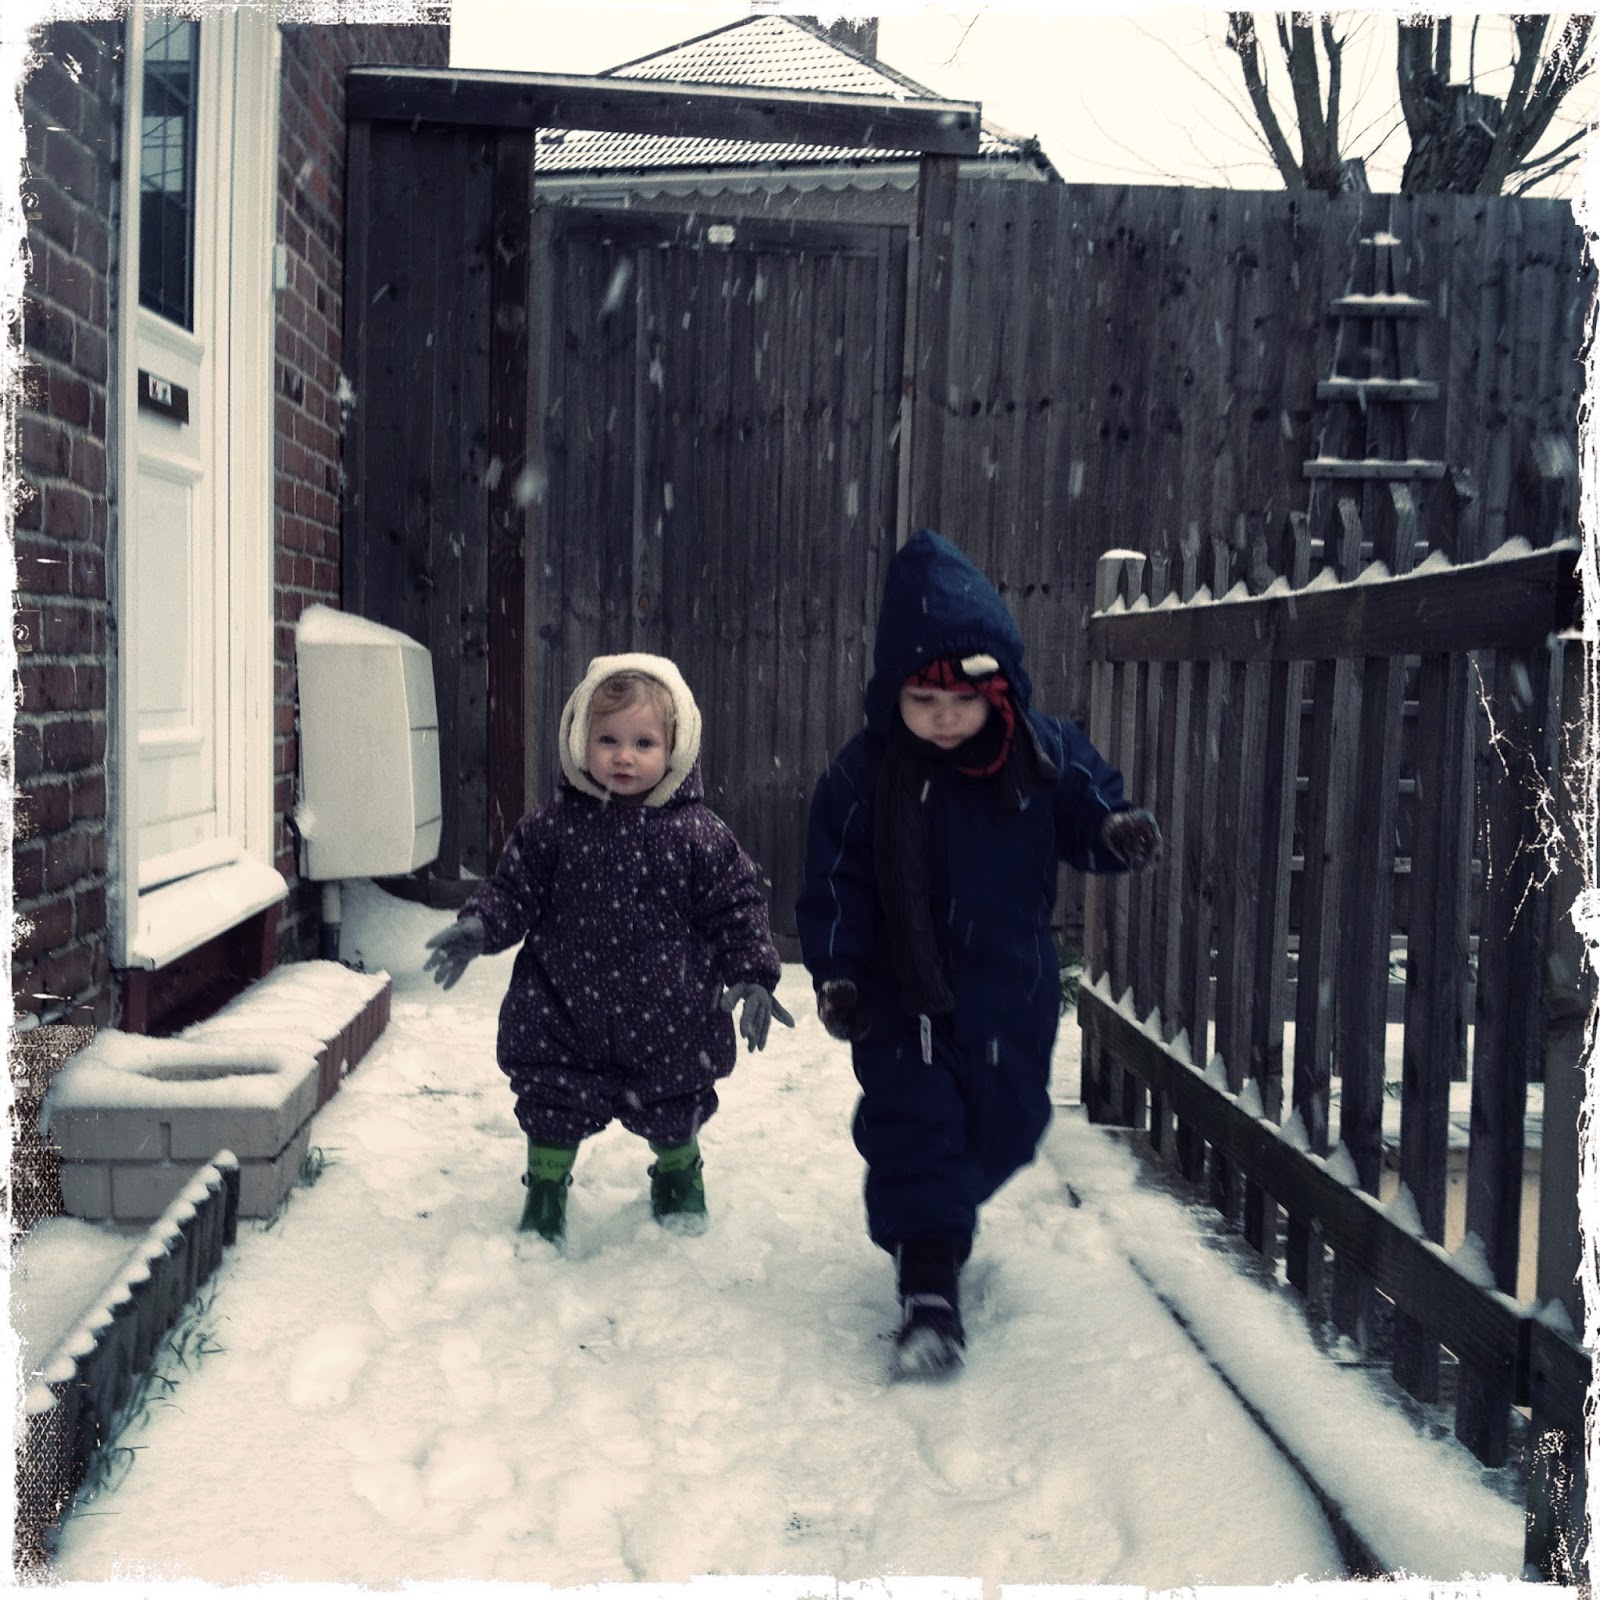 Blake Clement 3 and Maegan 1 Clement playing in the snow - Jan 2013